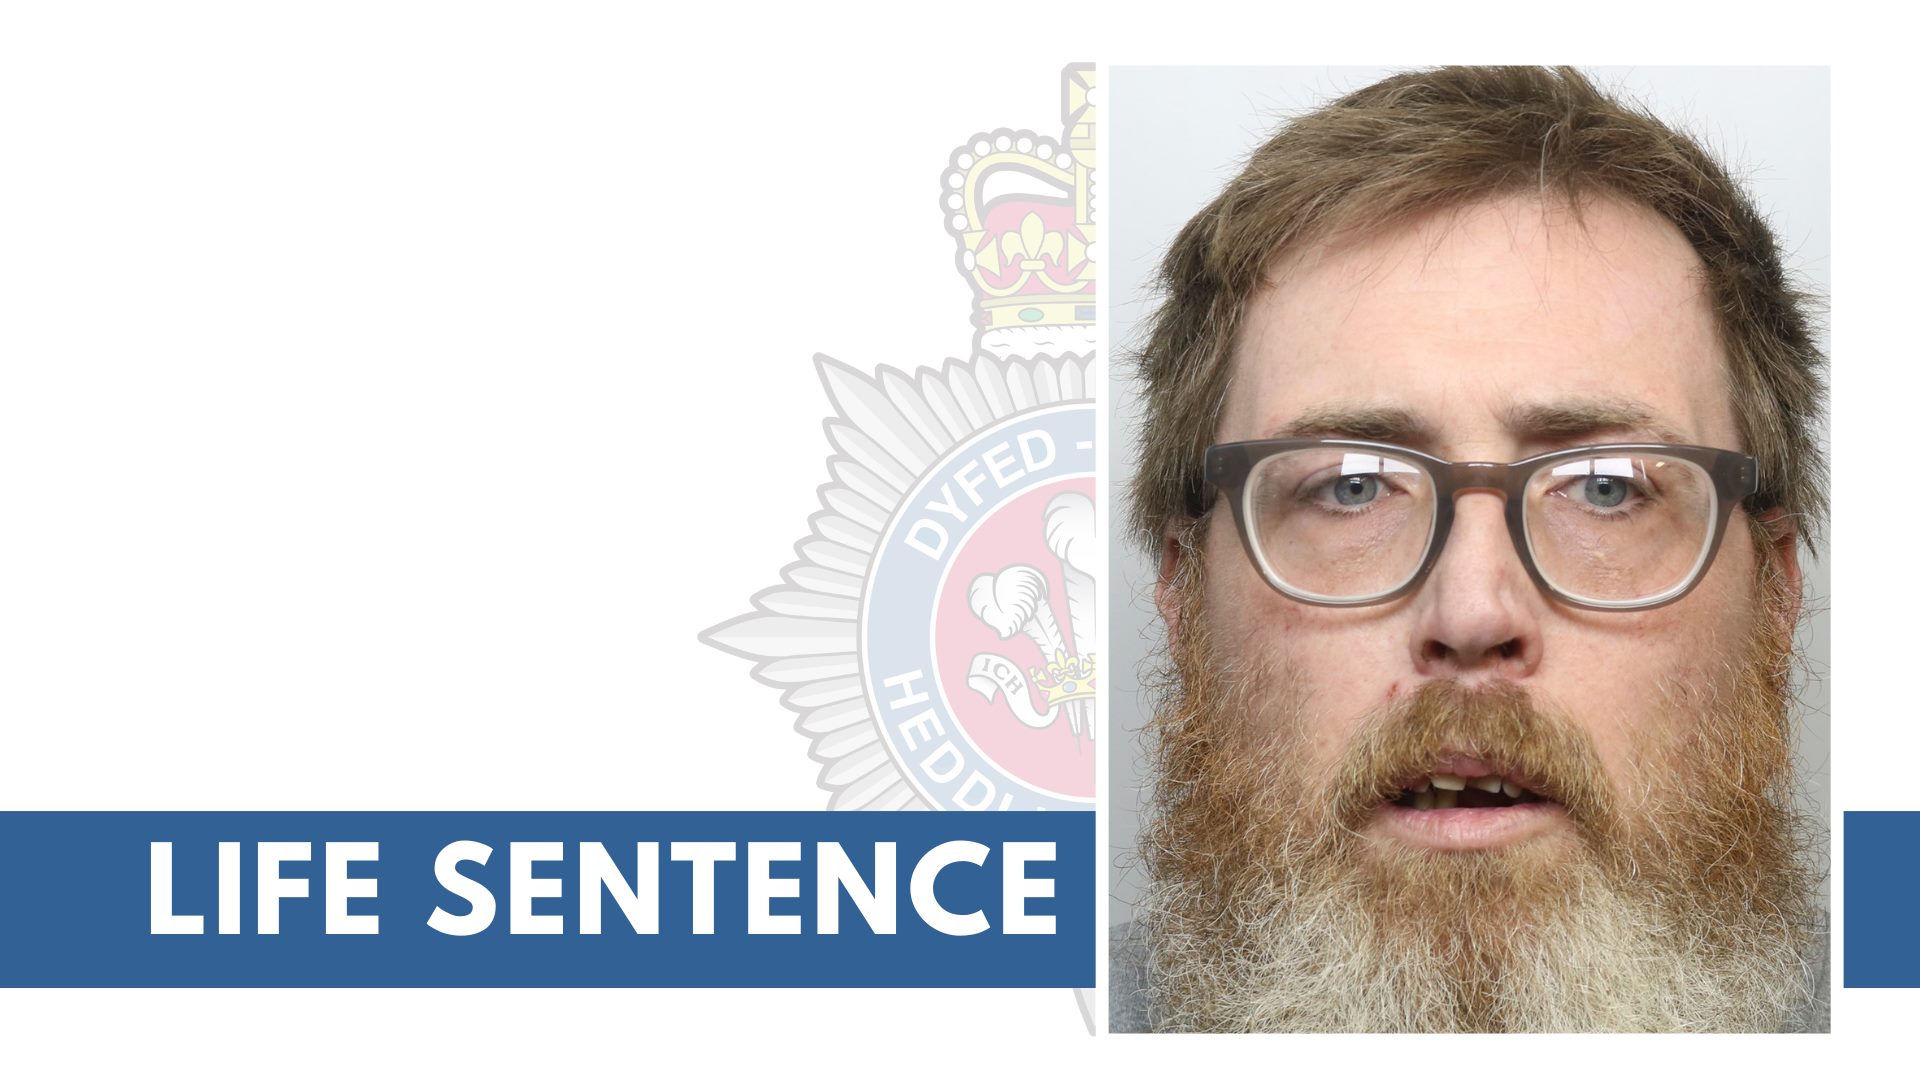 COURTS | A man who murdered his mother and continued to live in her home with her body has been sentenced to life in prison